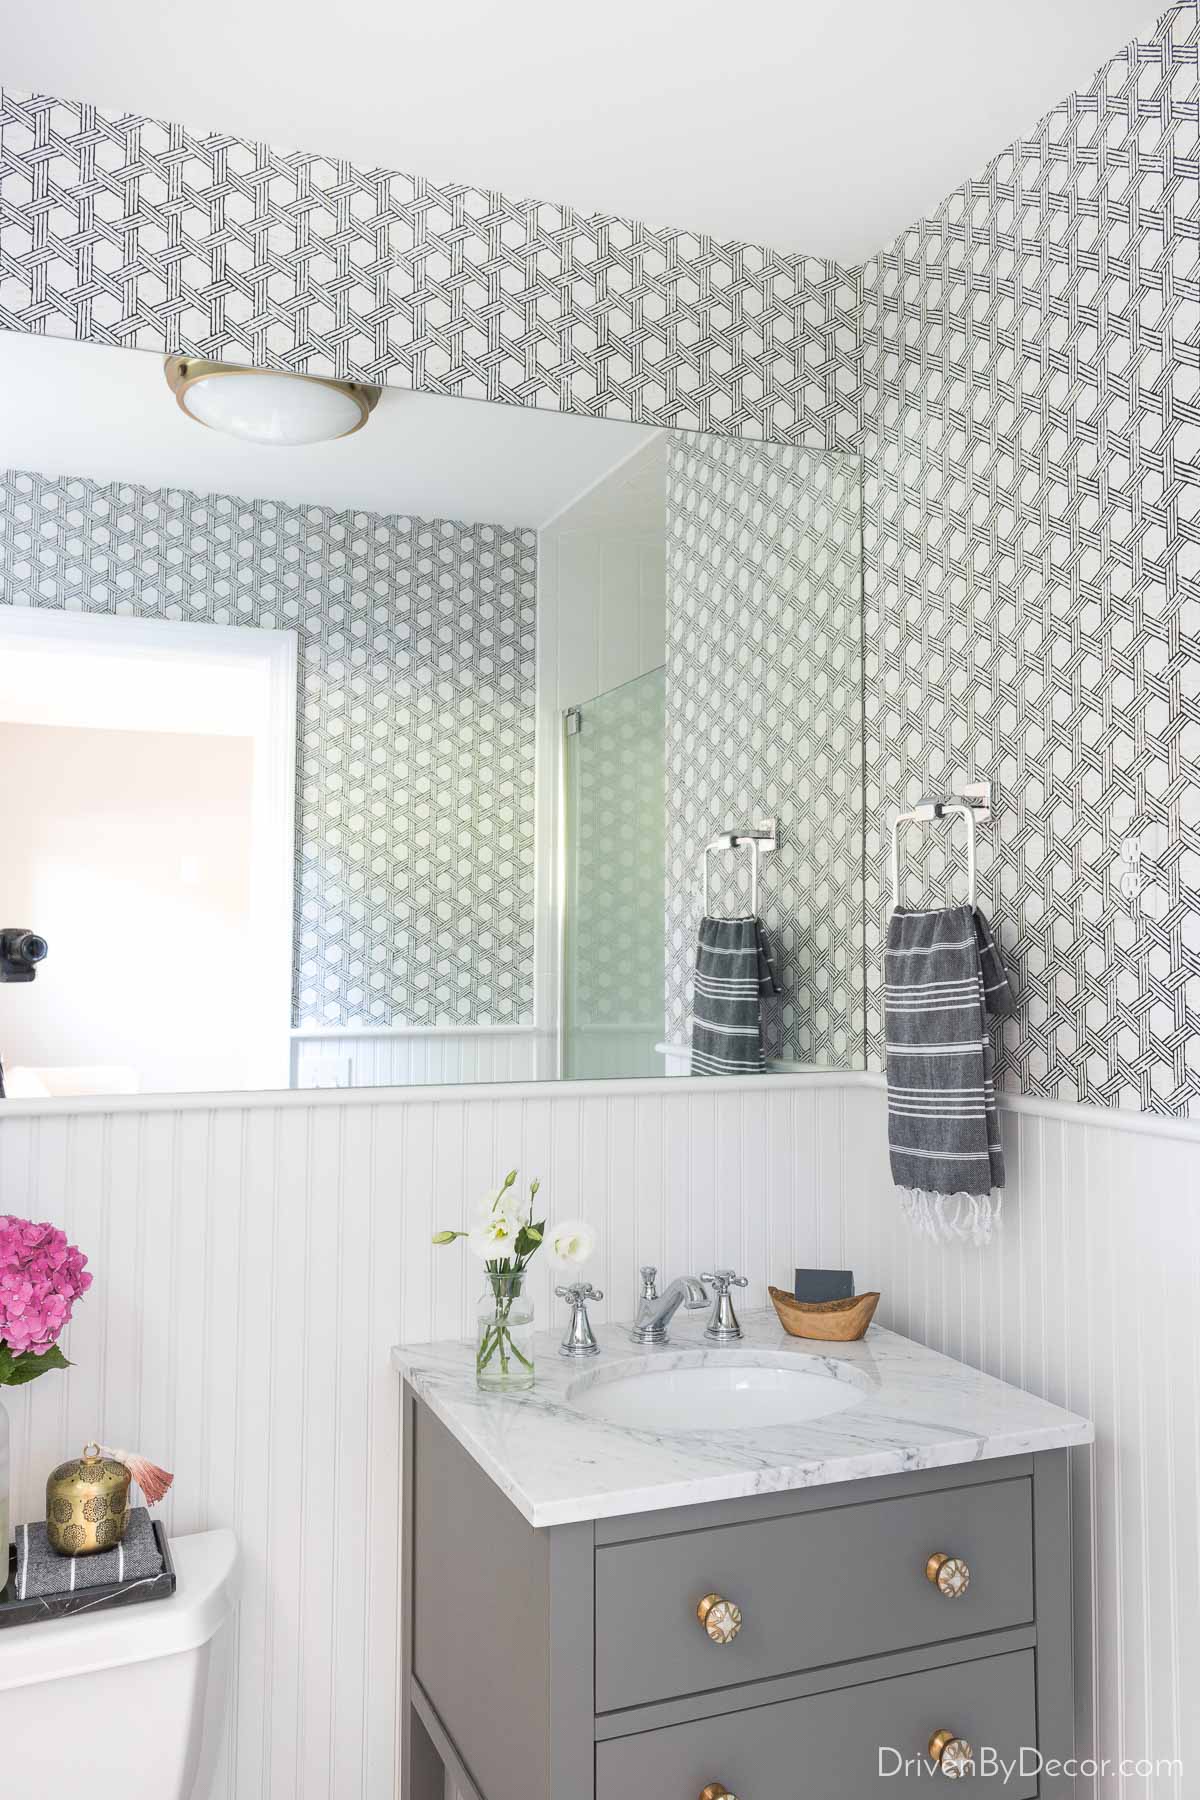 The black and white wallpaper we used to dress up our guest bathroom